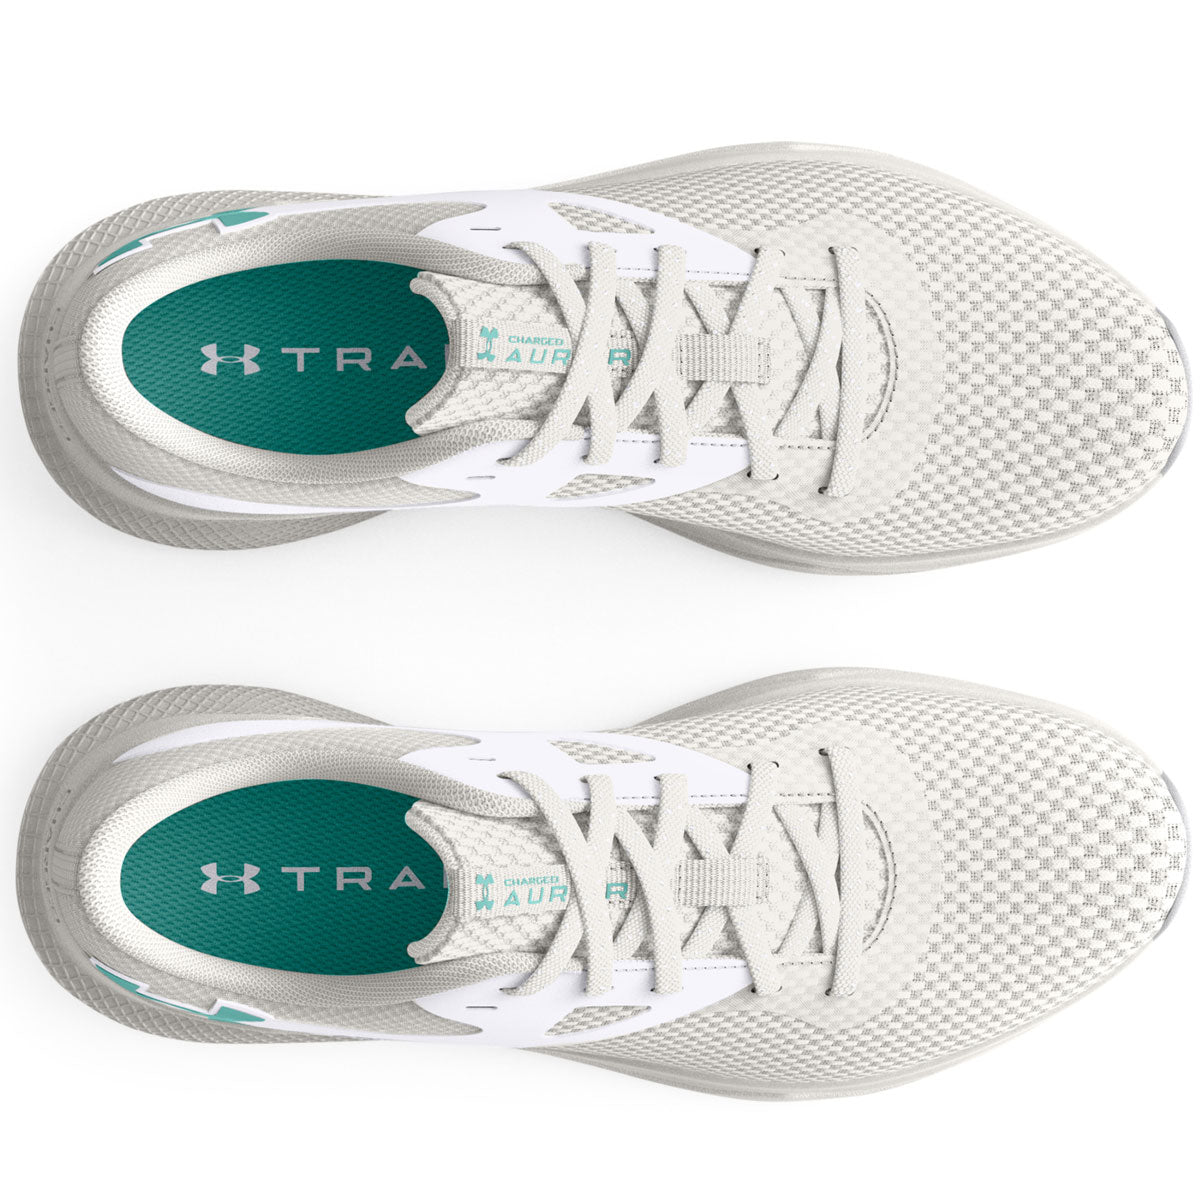 Under Armour Charged Aurora 2 Training Shoes - Womens - White/Clay/Radial Turquoise